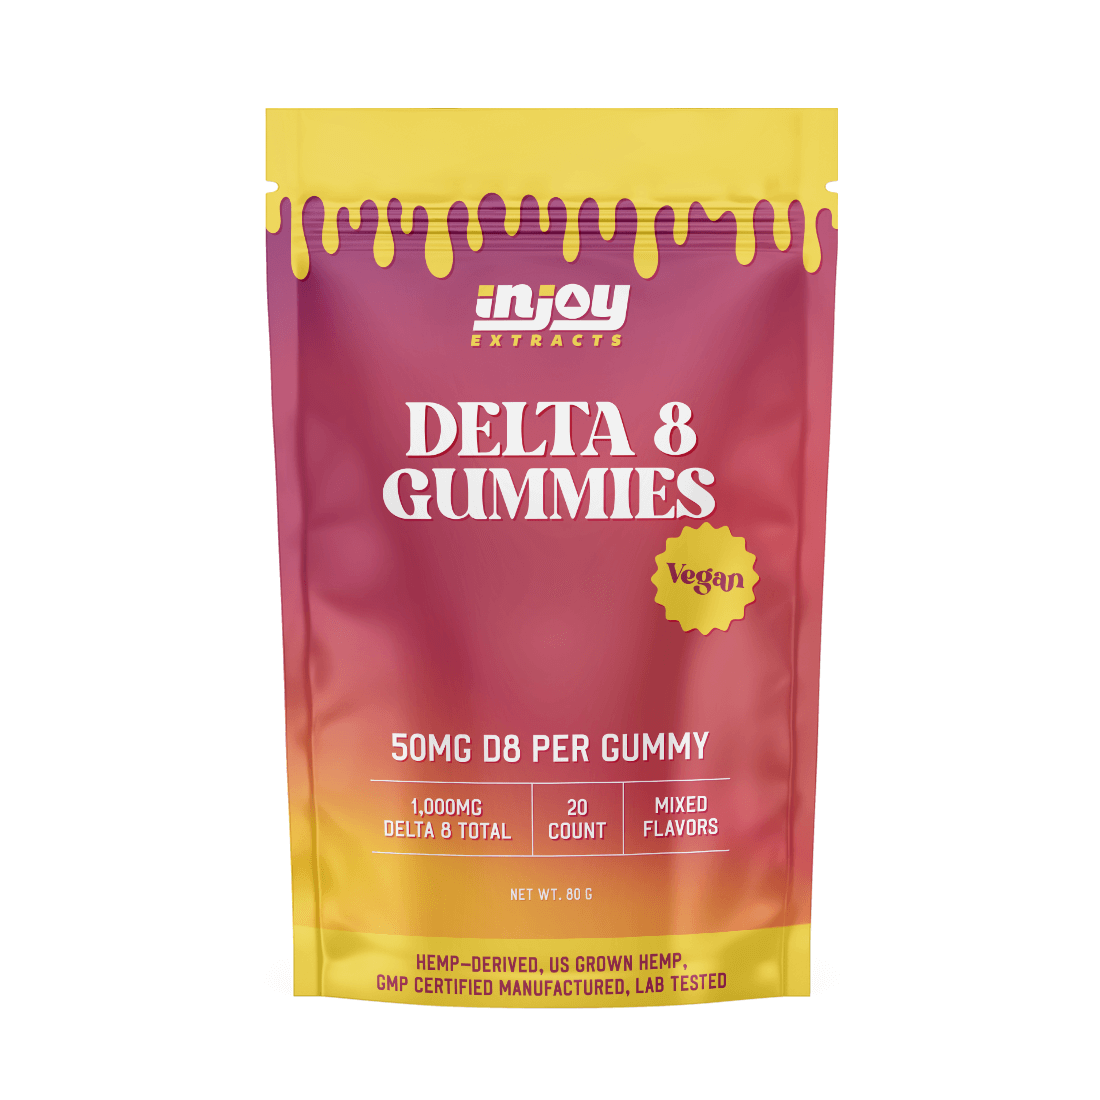 50mg delta 8 gummies are vegan, come with 20 gummies per bag and are mixed flavors